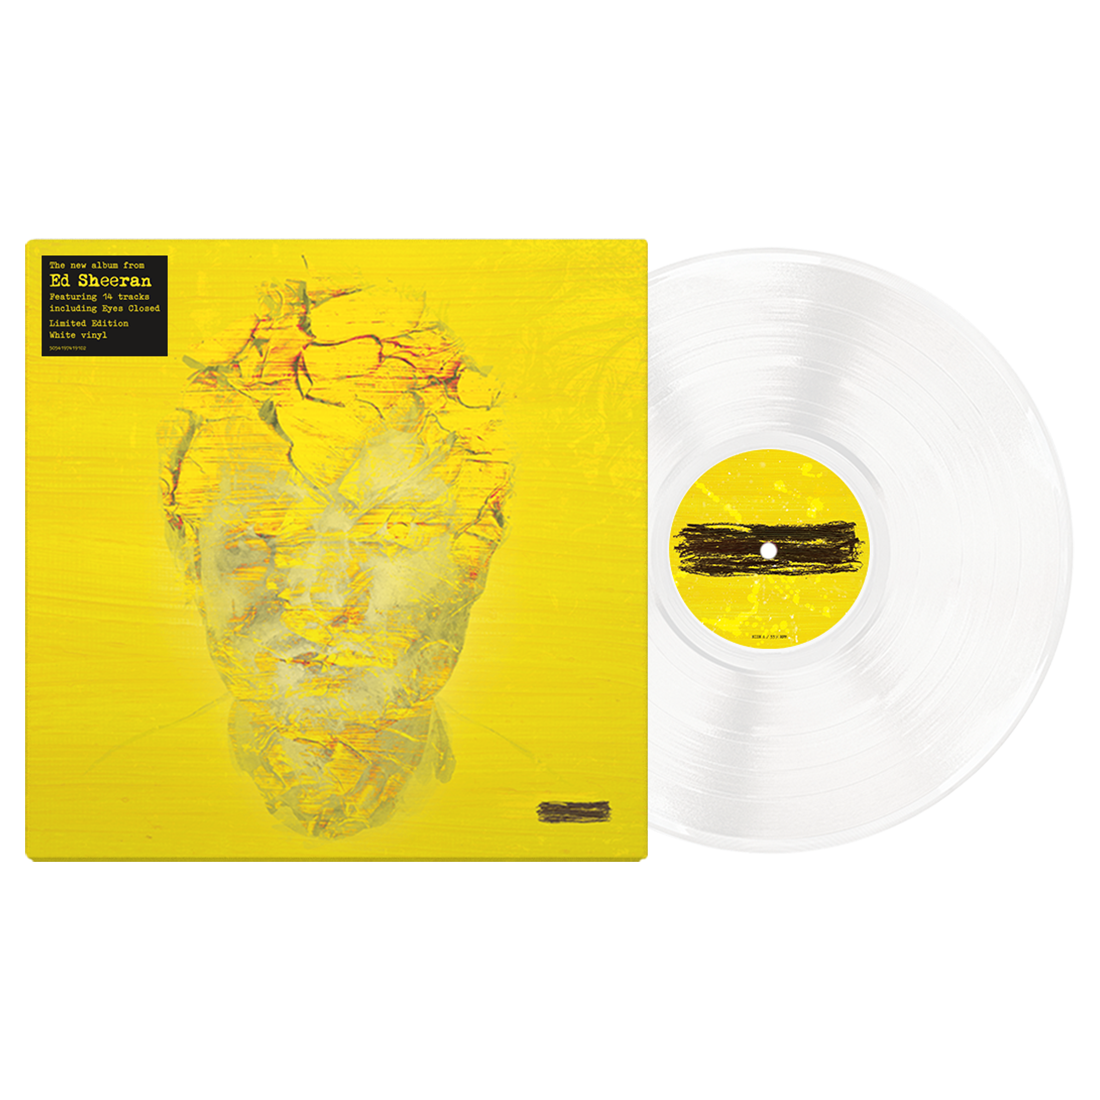 Ed Sheeran - (Subtract) (Indie Exclusive, Limited Edition White) Vinyl